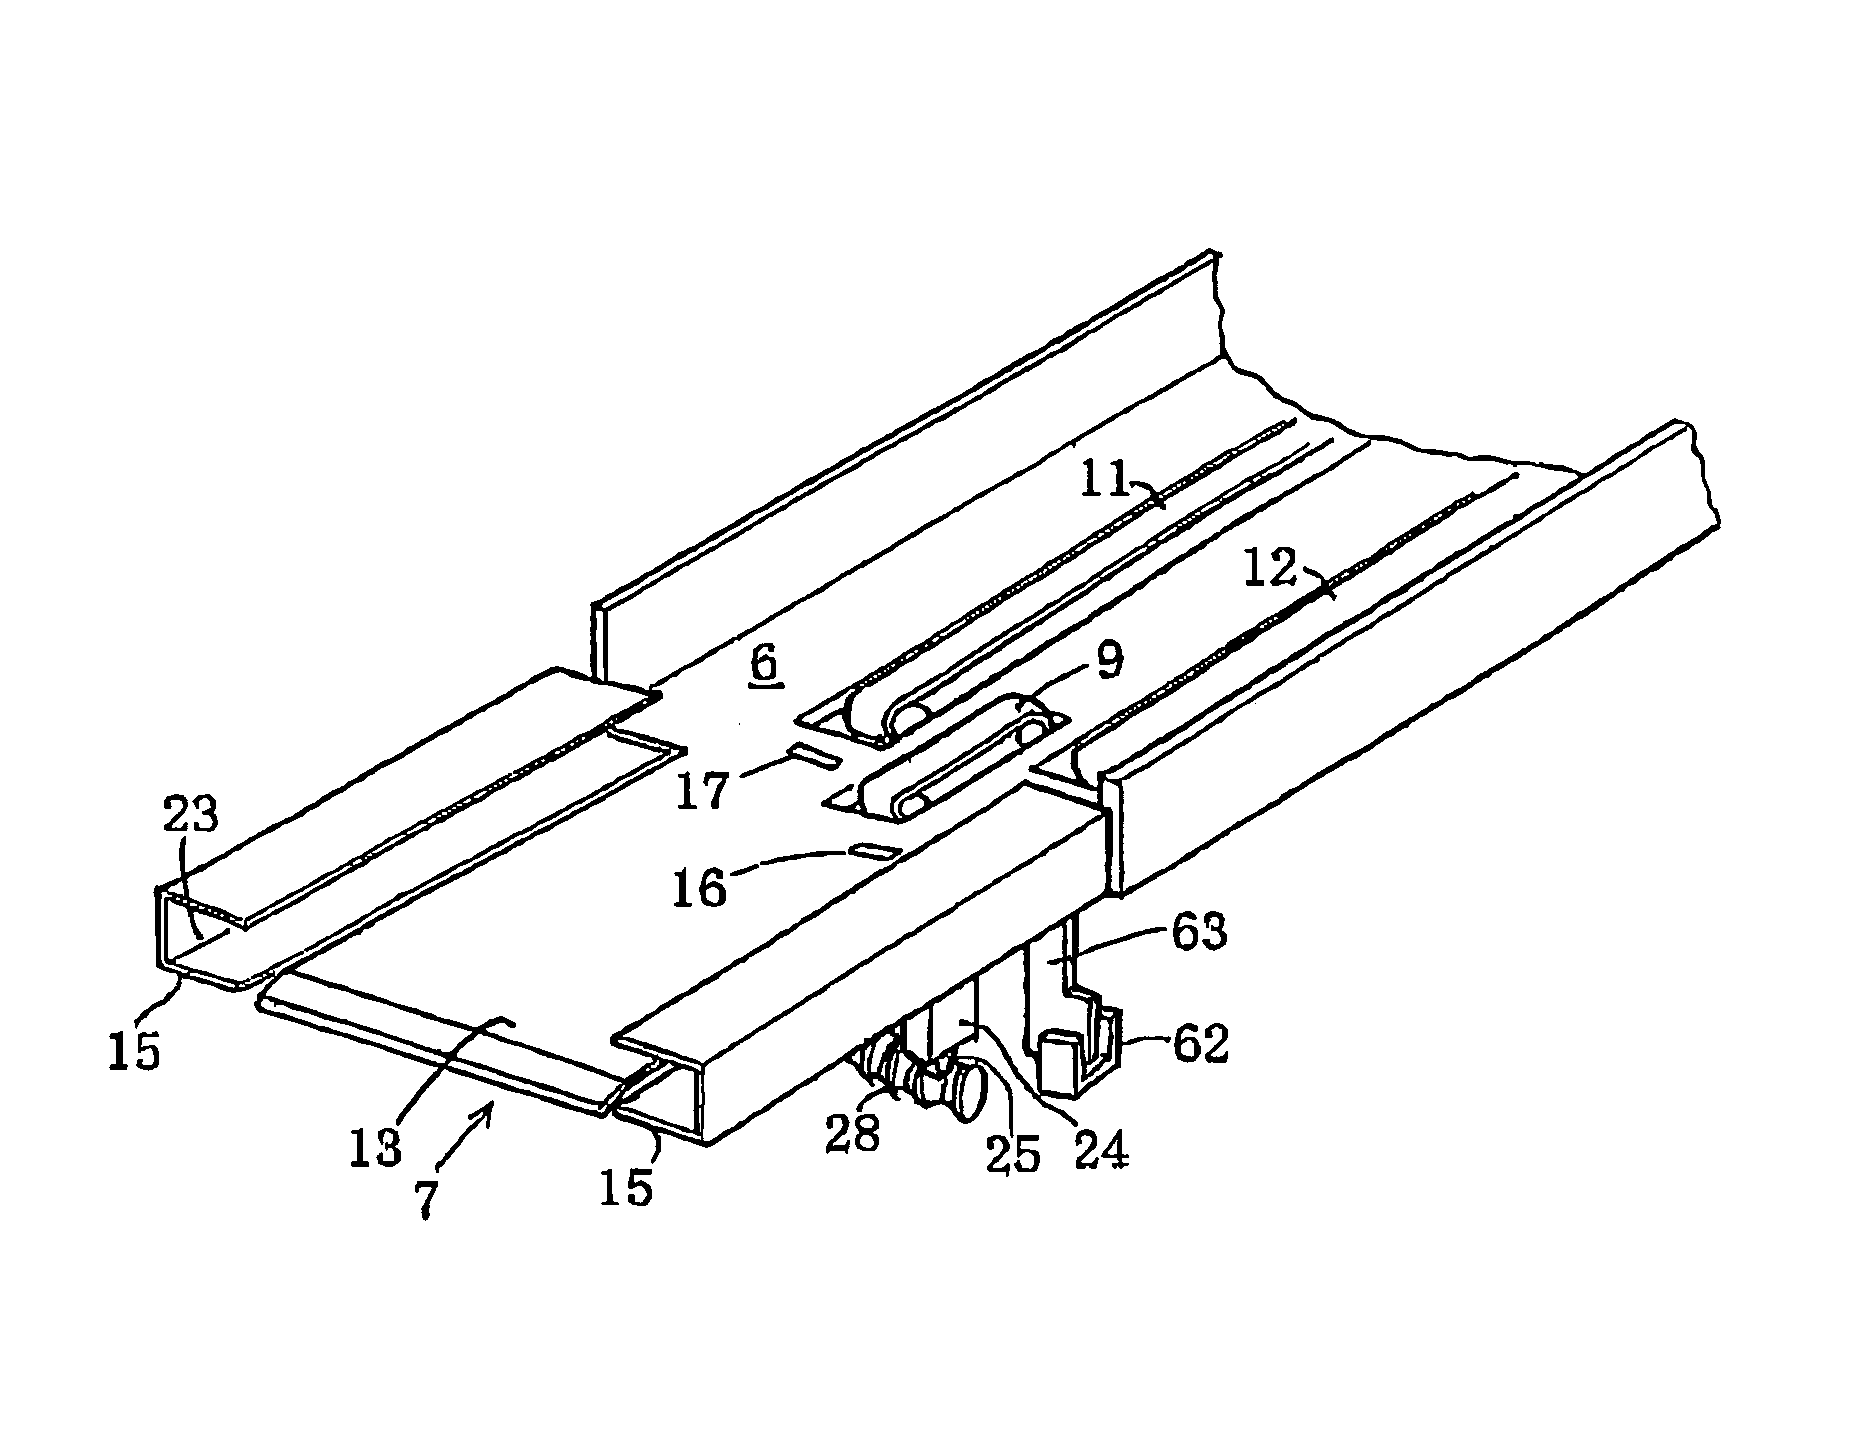 Bill validator with centering device